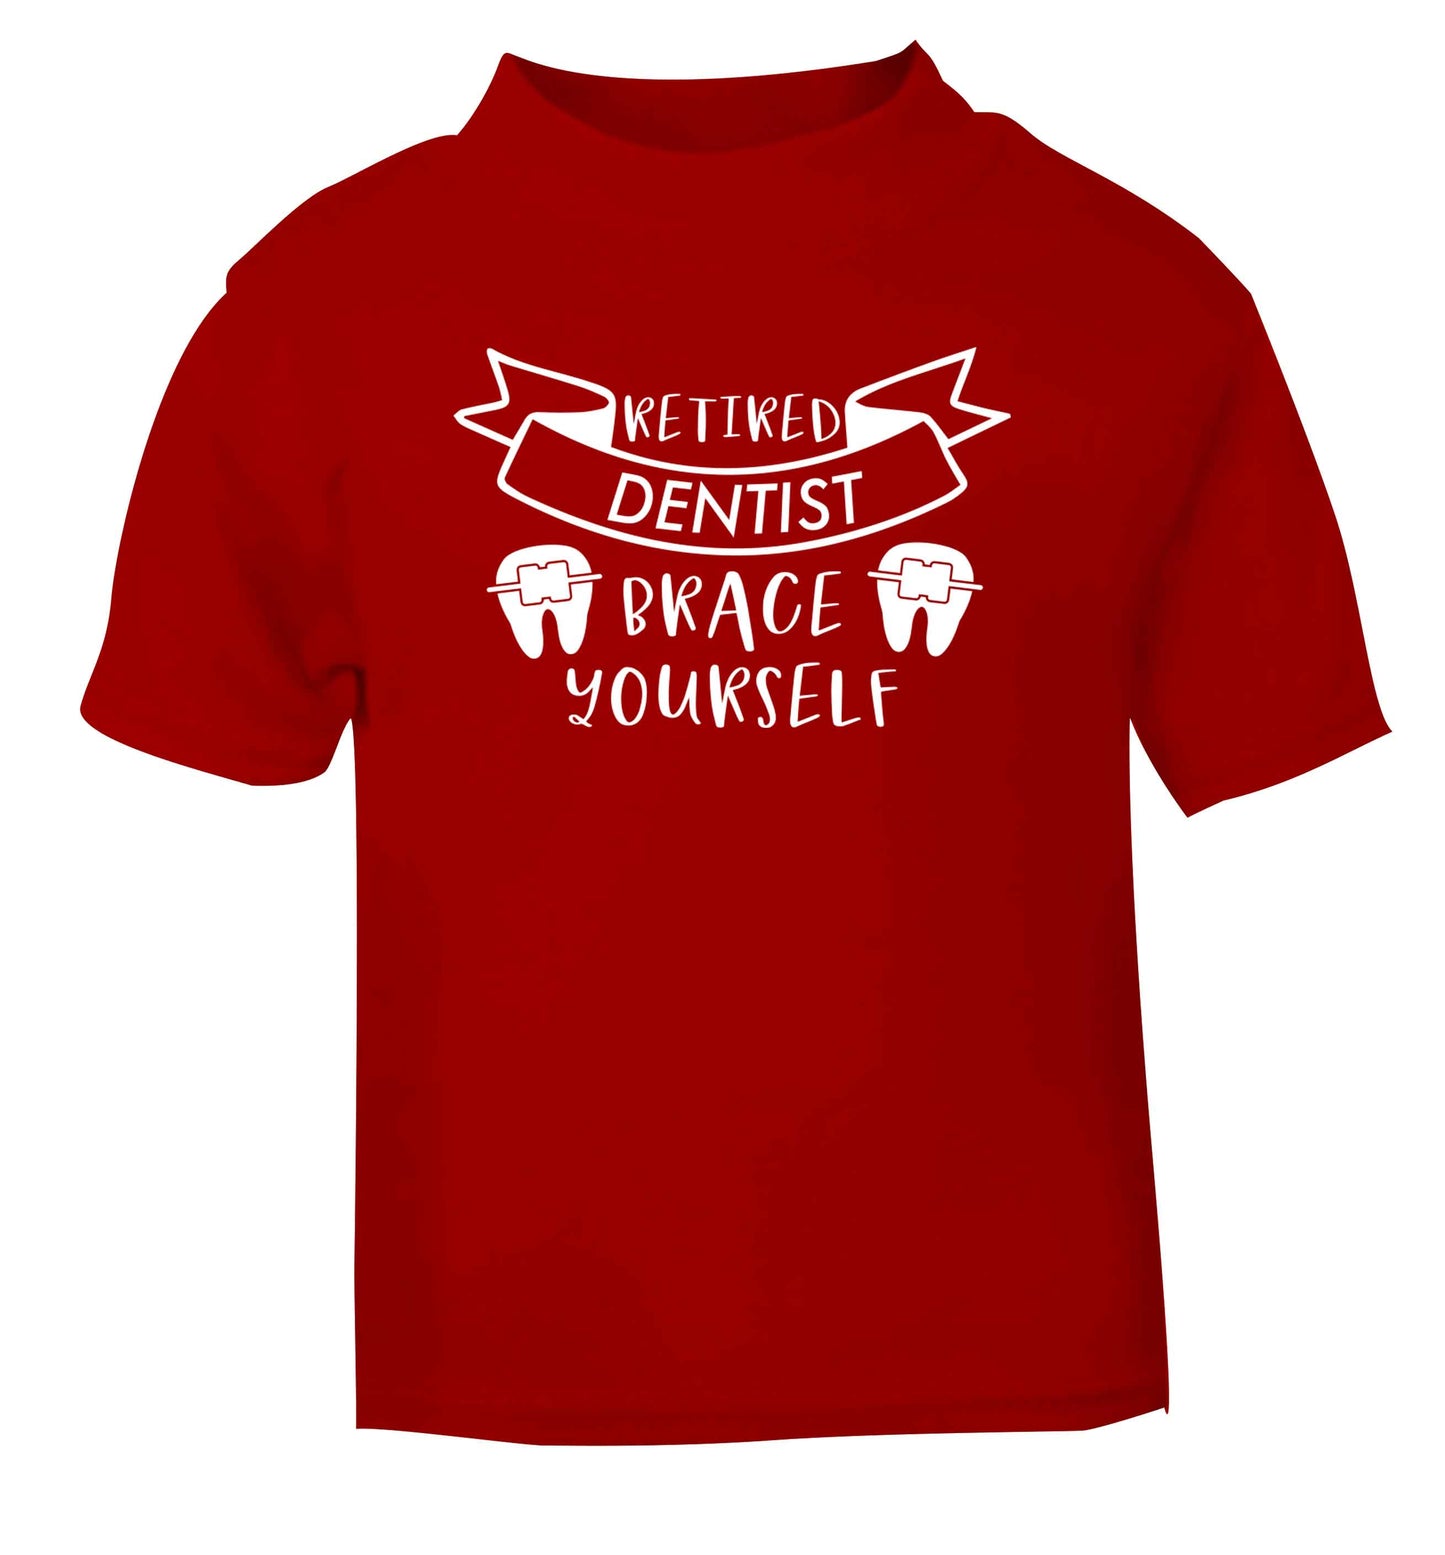 Retired dentist brace yourself red Baby Toddler Tshirt 2 Years